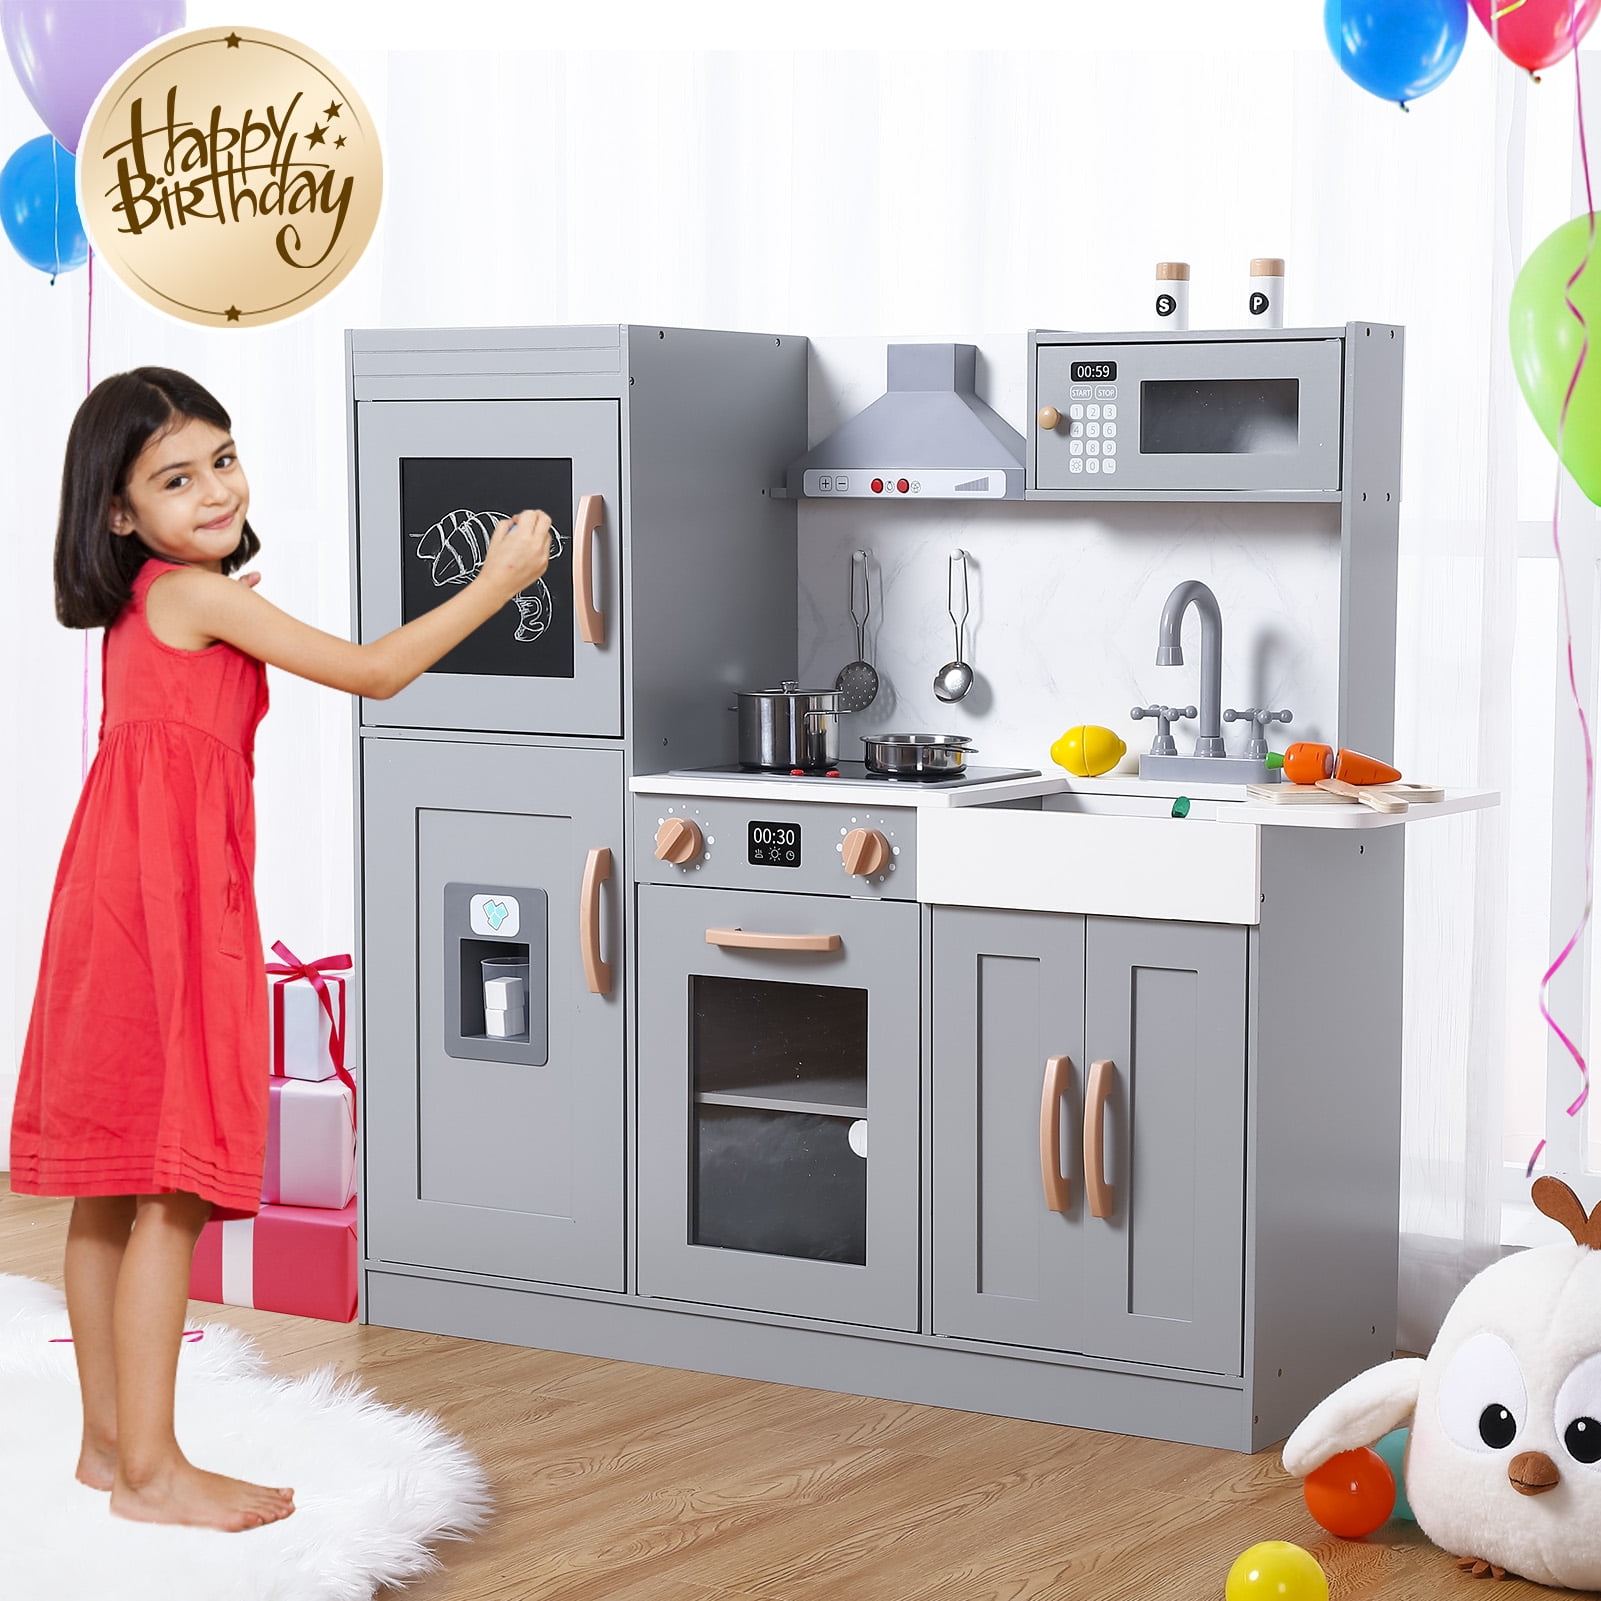 Qaba Corner Play Kitchen Set with Sound Effects and Tons of Countertop Space, Large Wooden Kitchen with Washing Machine, Food Toys, Ice Maker, Kids